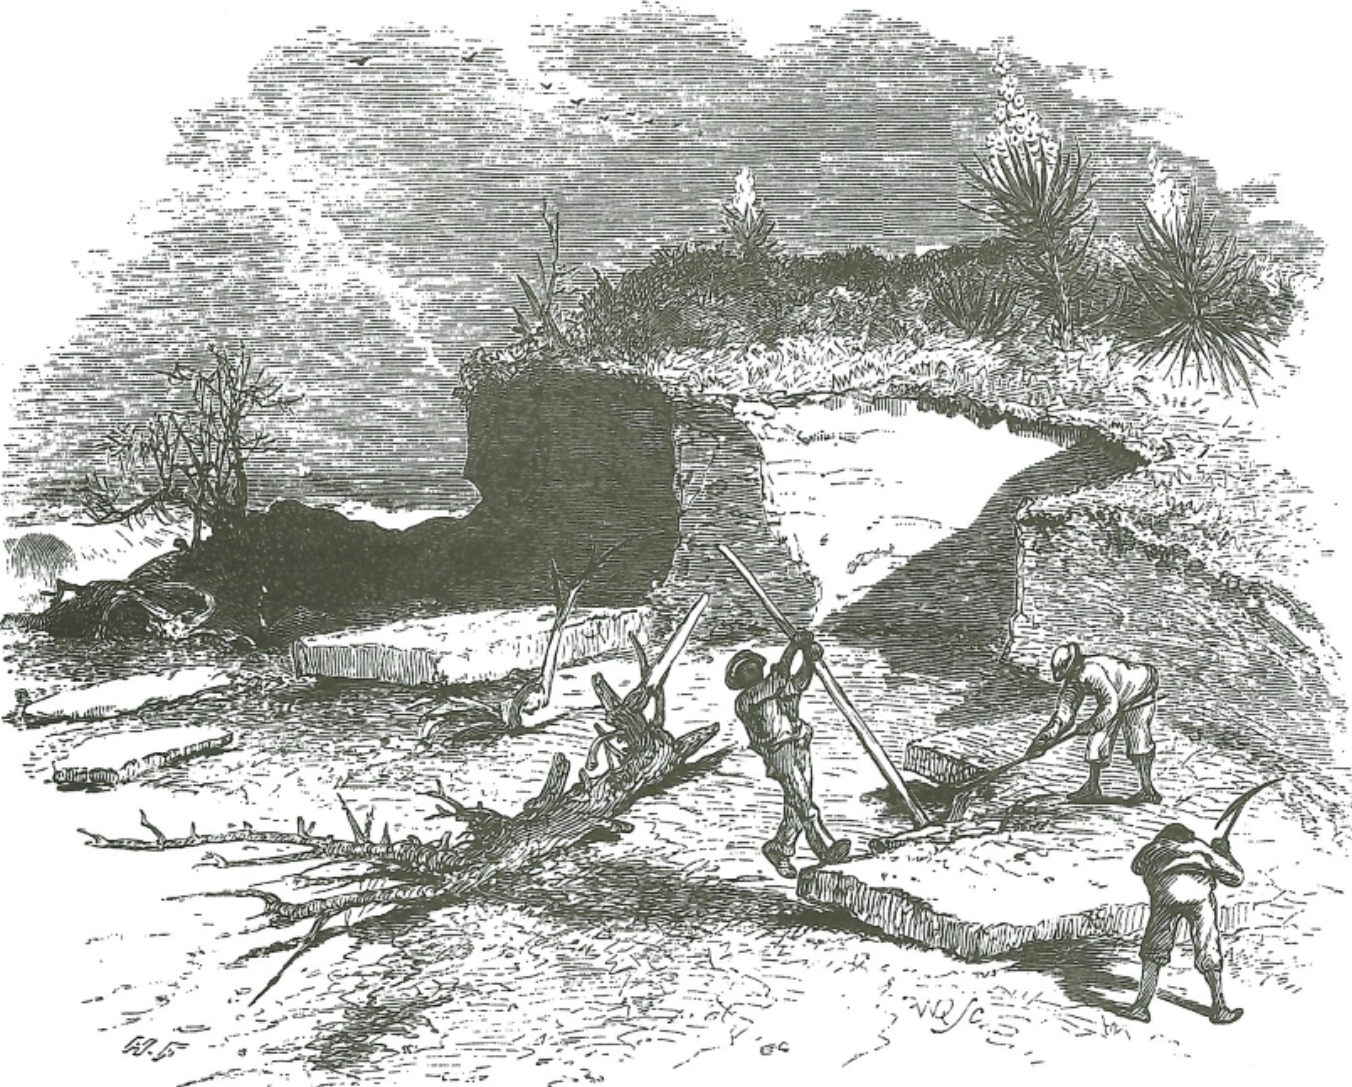 Illustration of workers using bars and pickaxes to cut coquina from a quarry.